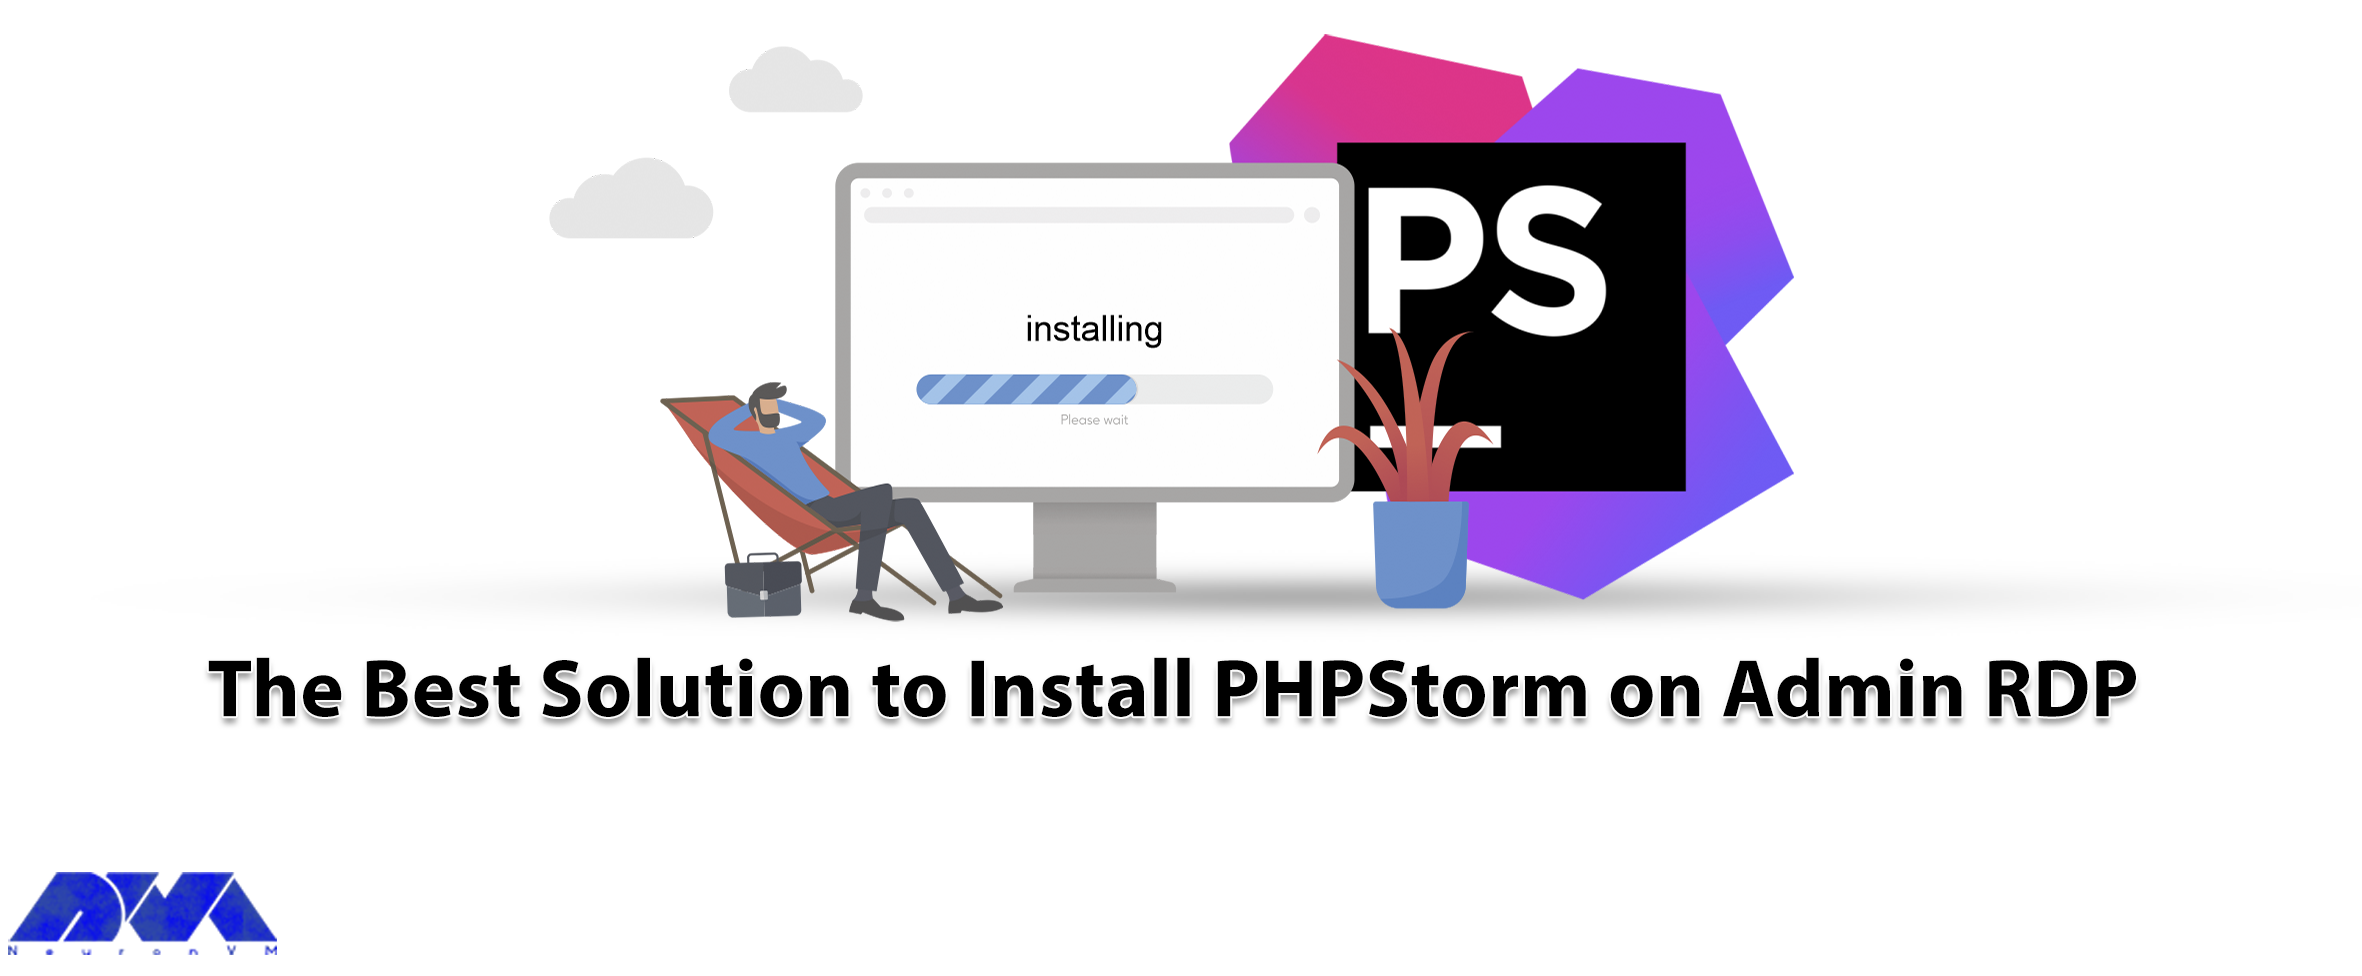 The Best Solution to Install PhpStorm on Admin RDP - NeuronVM